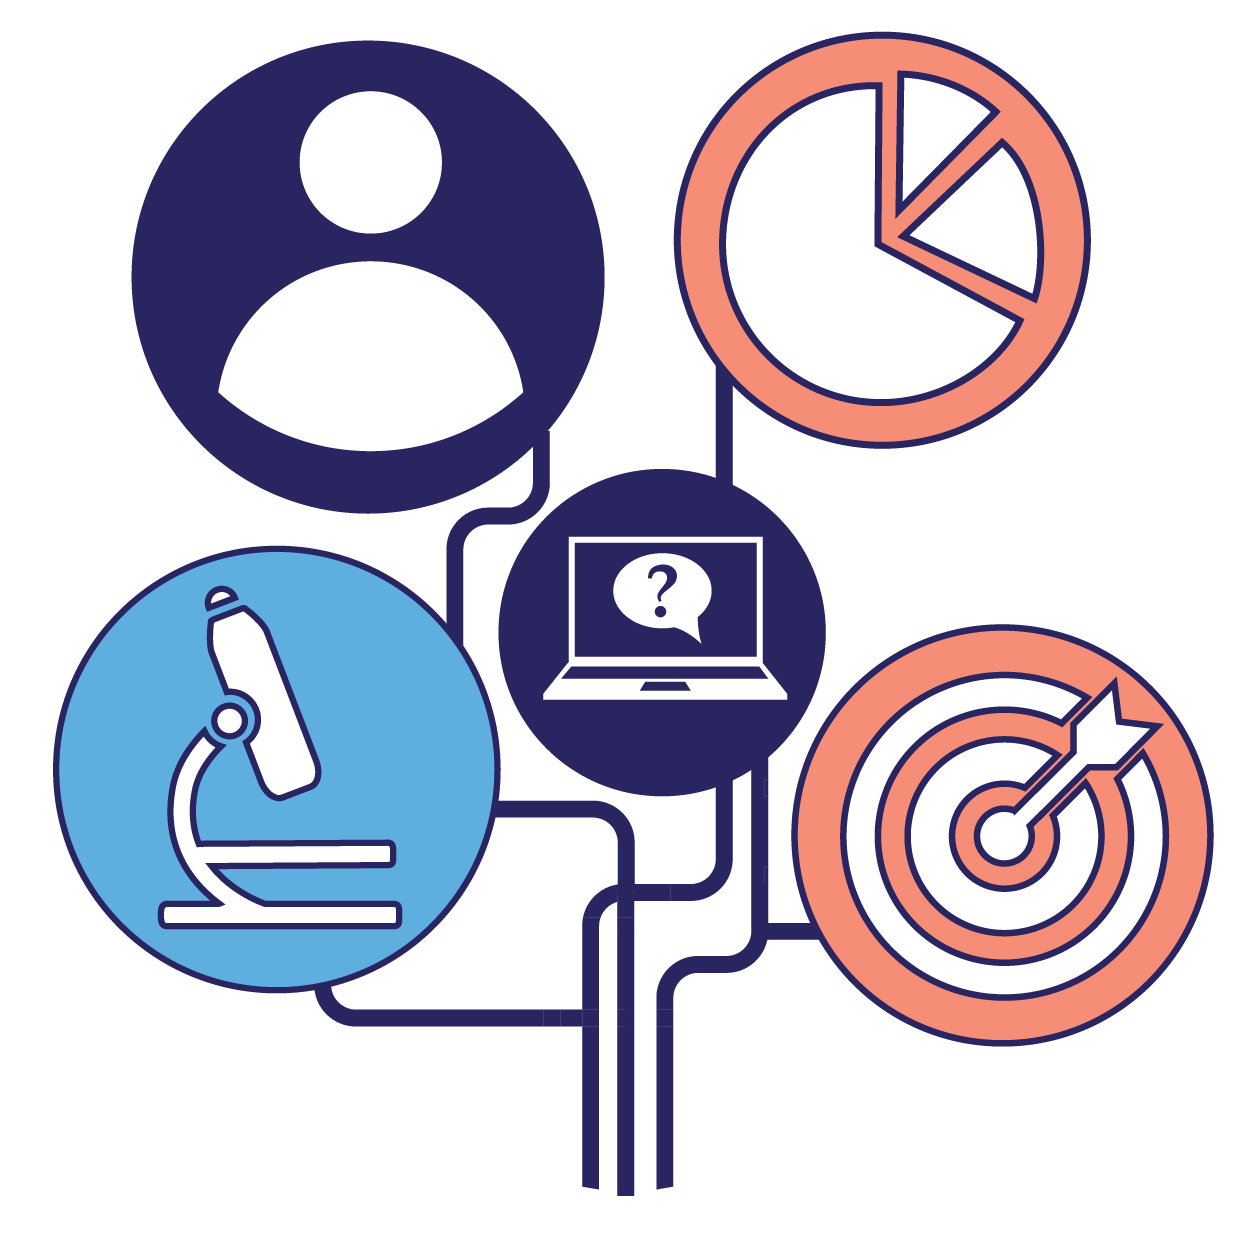 A series of icons including a person (top left), pie chart (top right), microscope (bottom left), and target (bottom right) connect in the center to an icon of a laptop. The layout resembles a network.